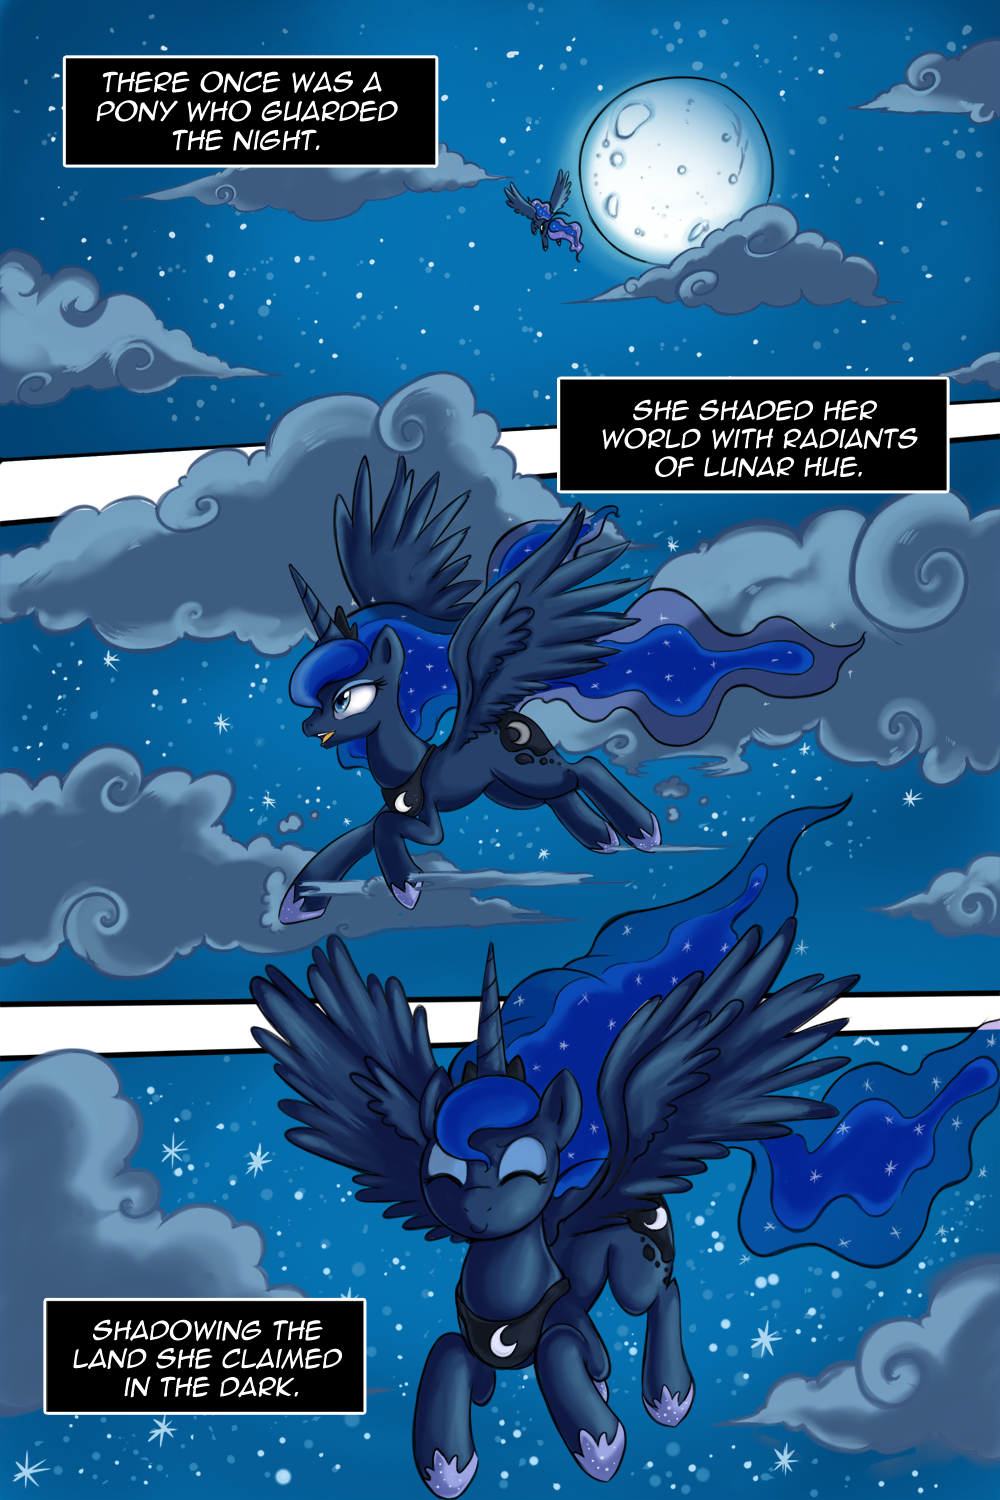 mlp_the_fallen_moon_chapter_1_page_1_by_guardian_core-d5t5rnl.png